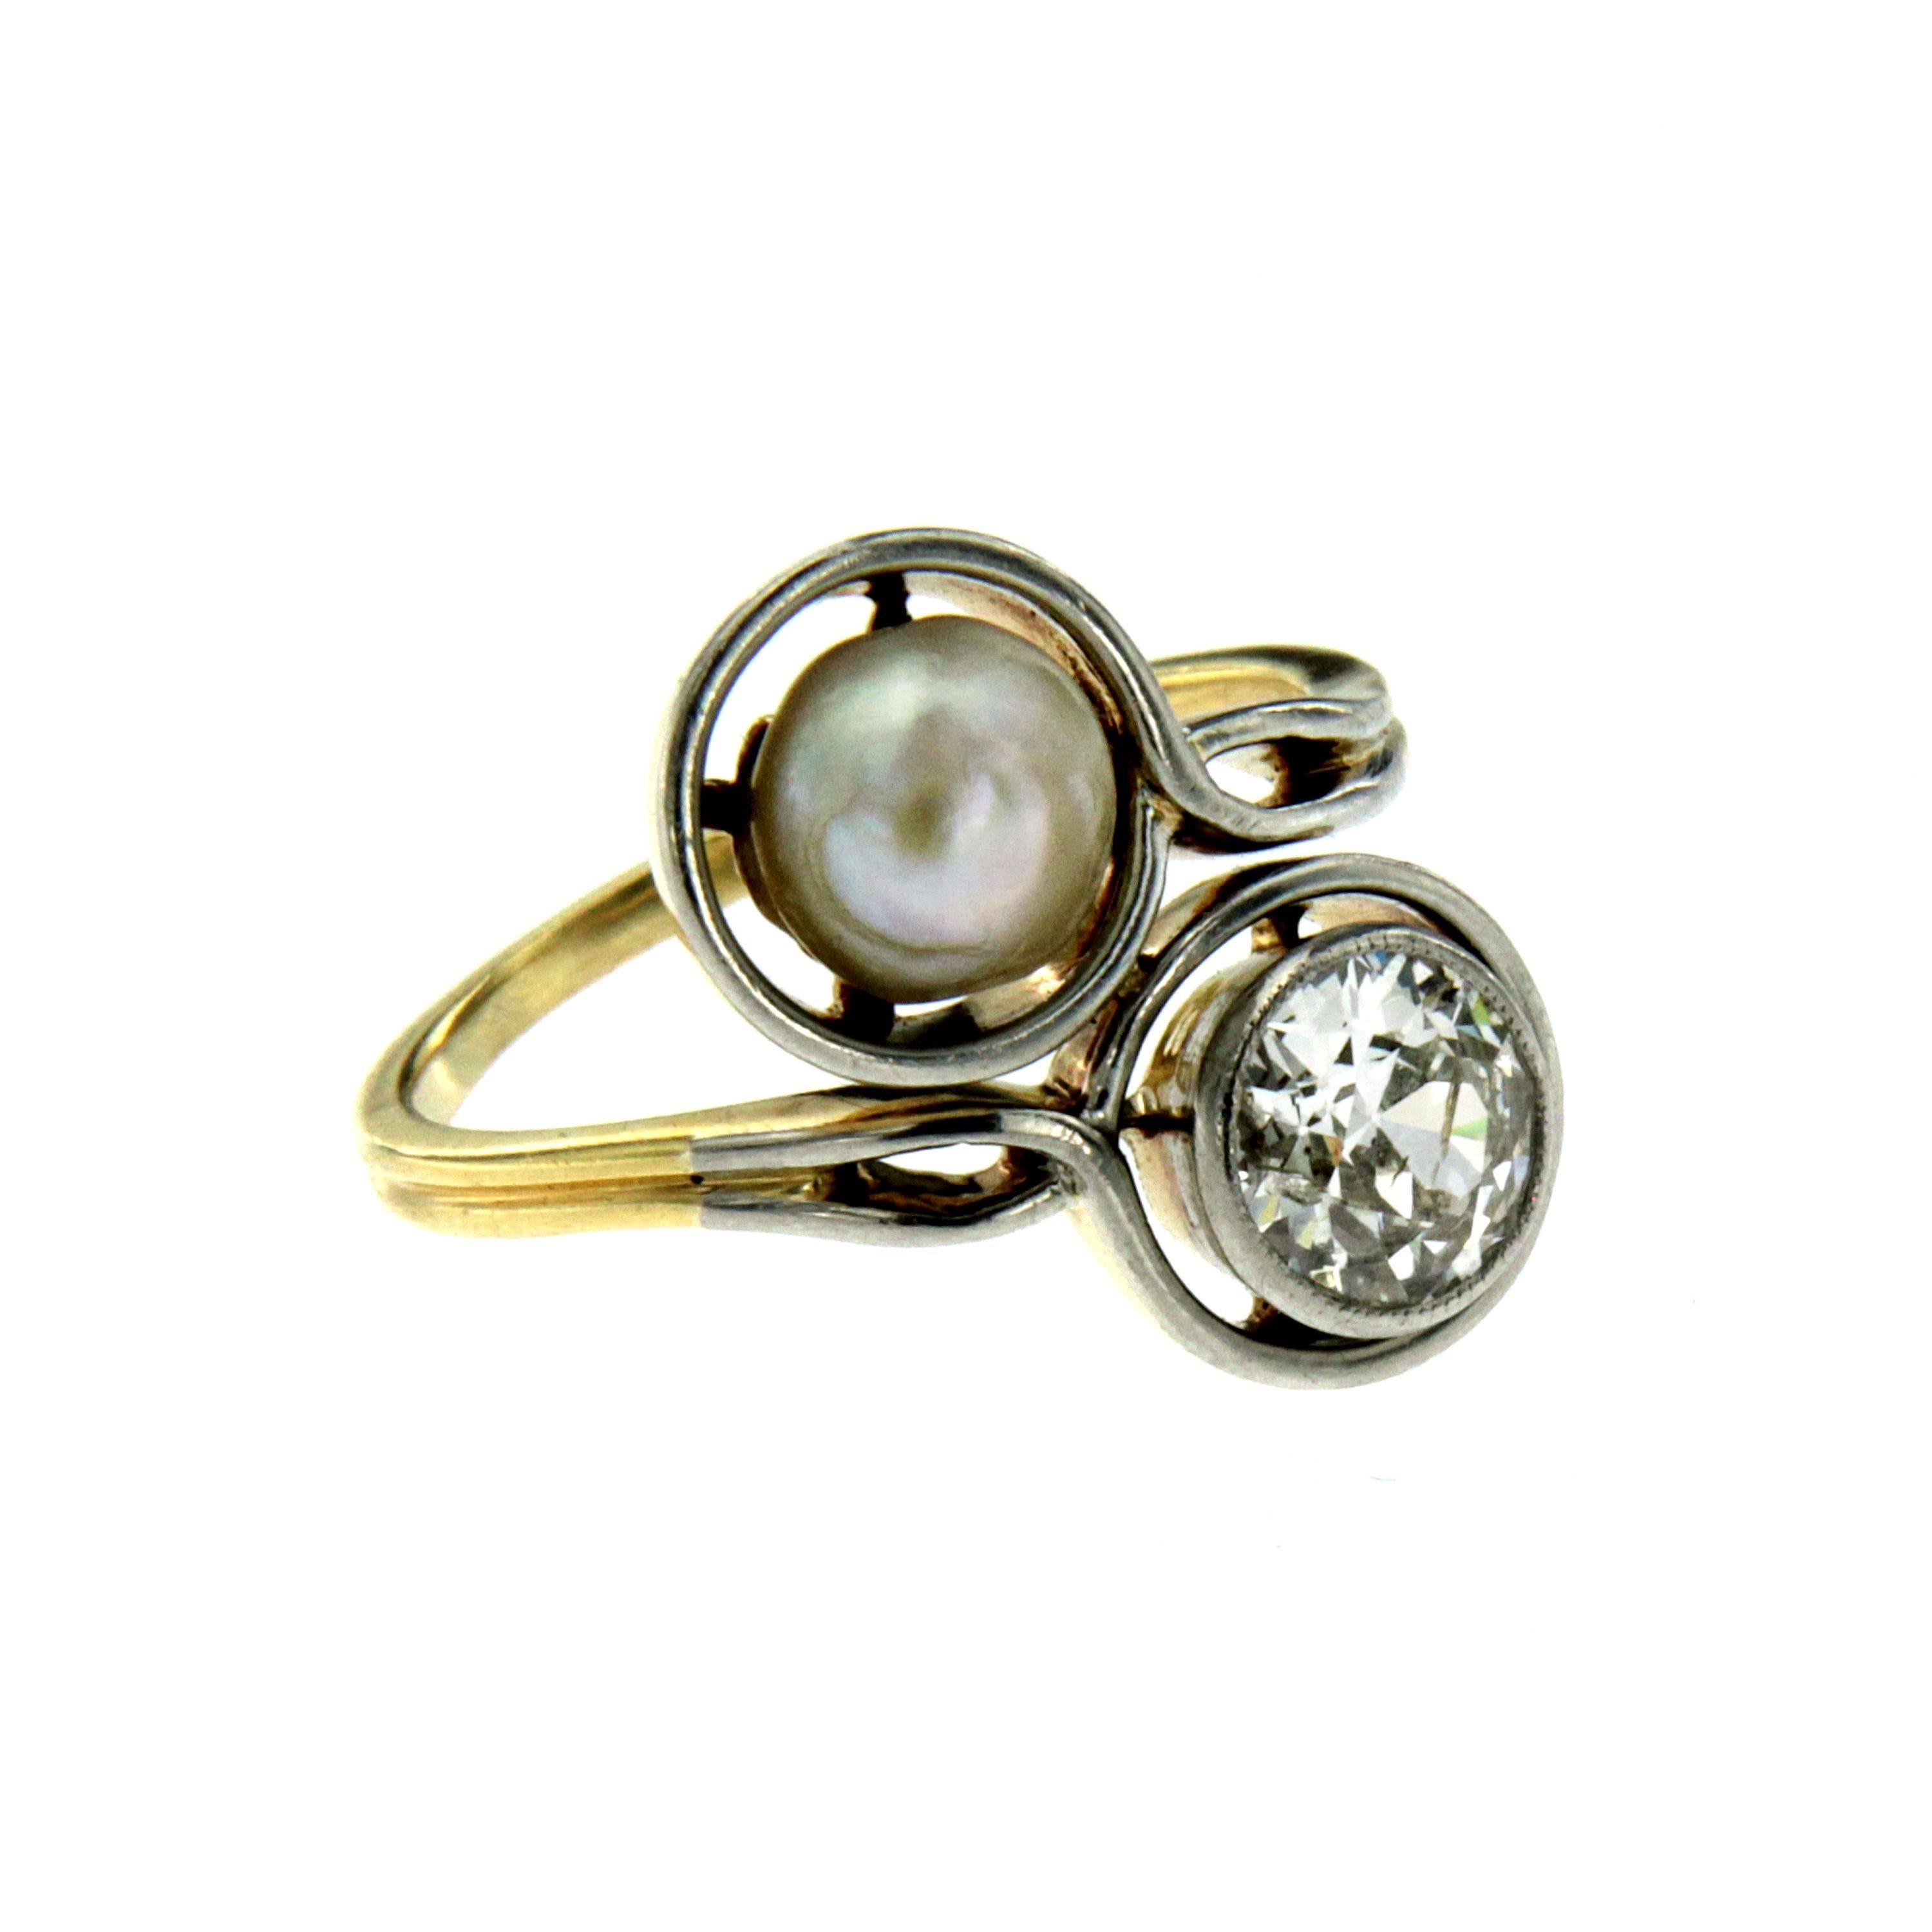 A beautiful 18k gold and Platinum 'Vous et Moi' ring set with an old mine cut diamond weighing approx. 1.00 cts H-I color Vs and a natural pearl. Circa 1930

CONDITION: Pre-owned - Excellent 
METAL: 18k Gold and Platinum
GEM STONE: Diamond 1.00